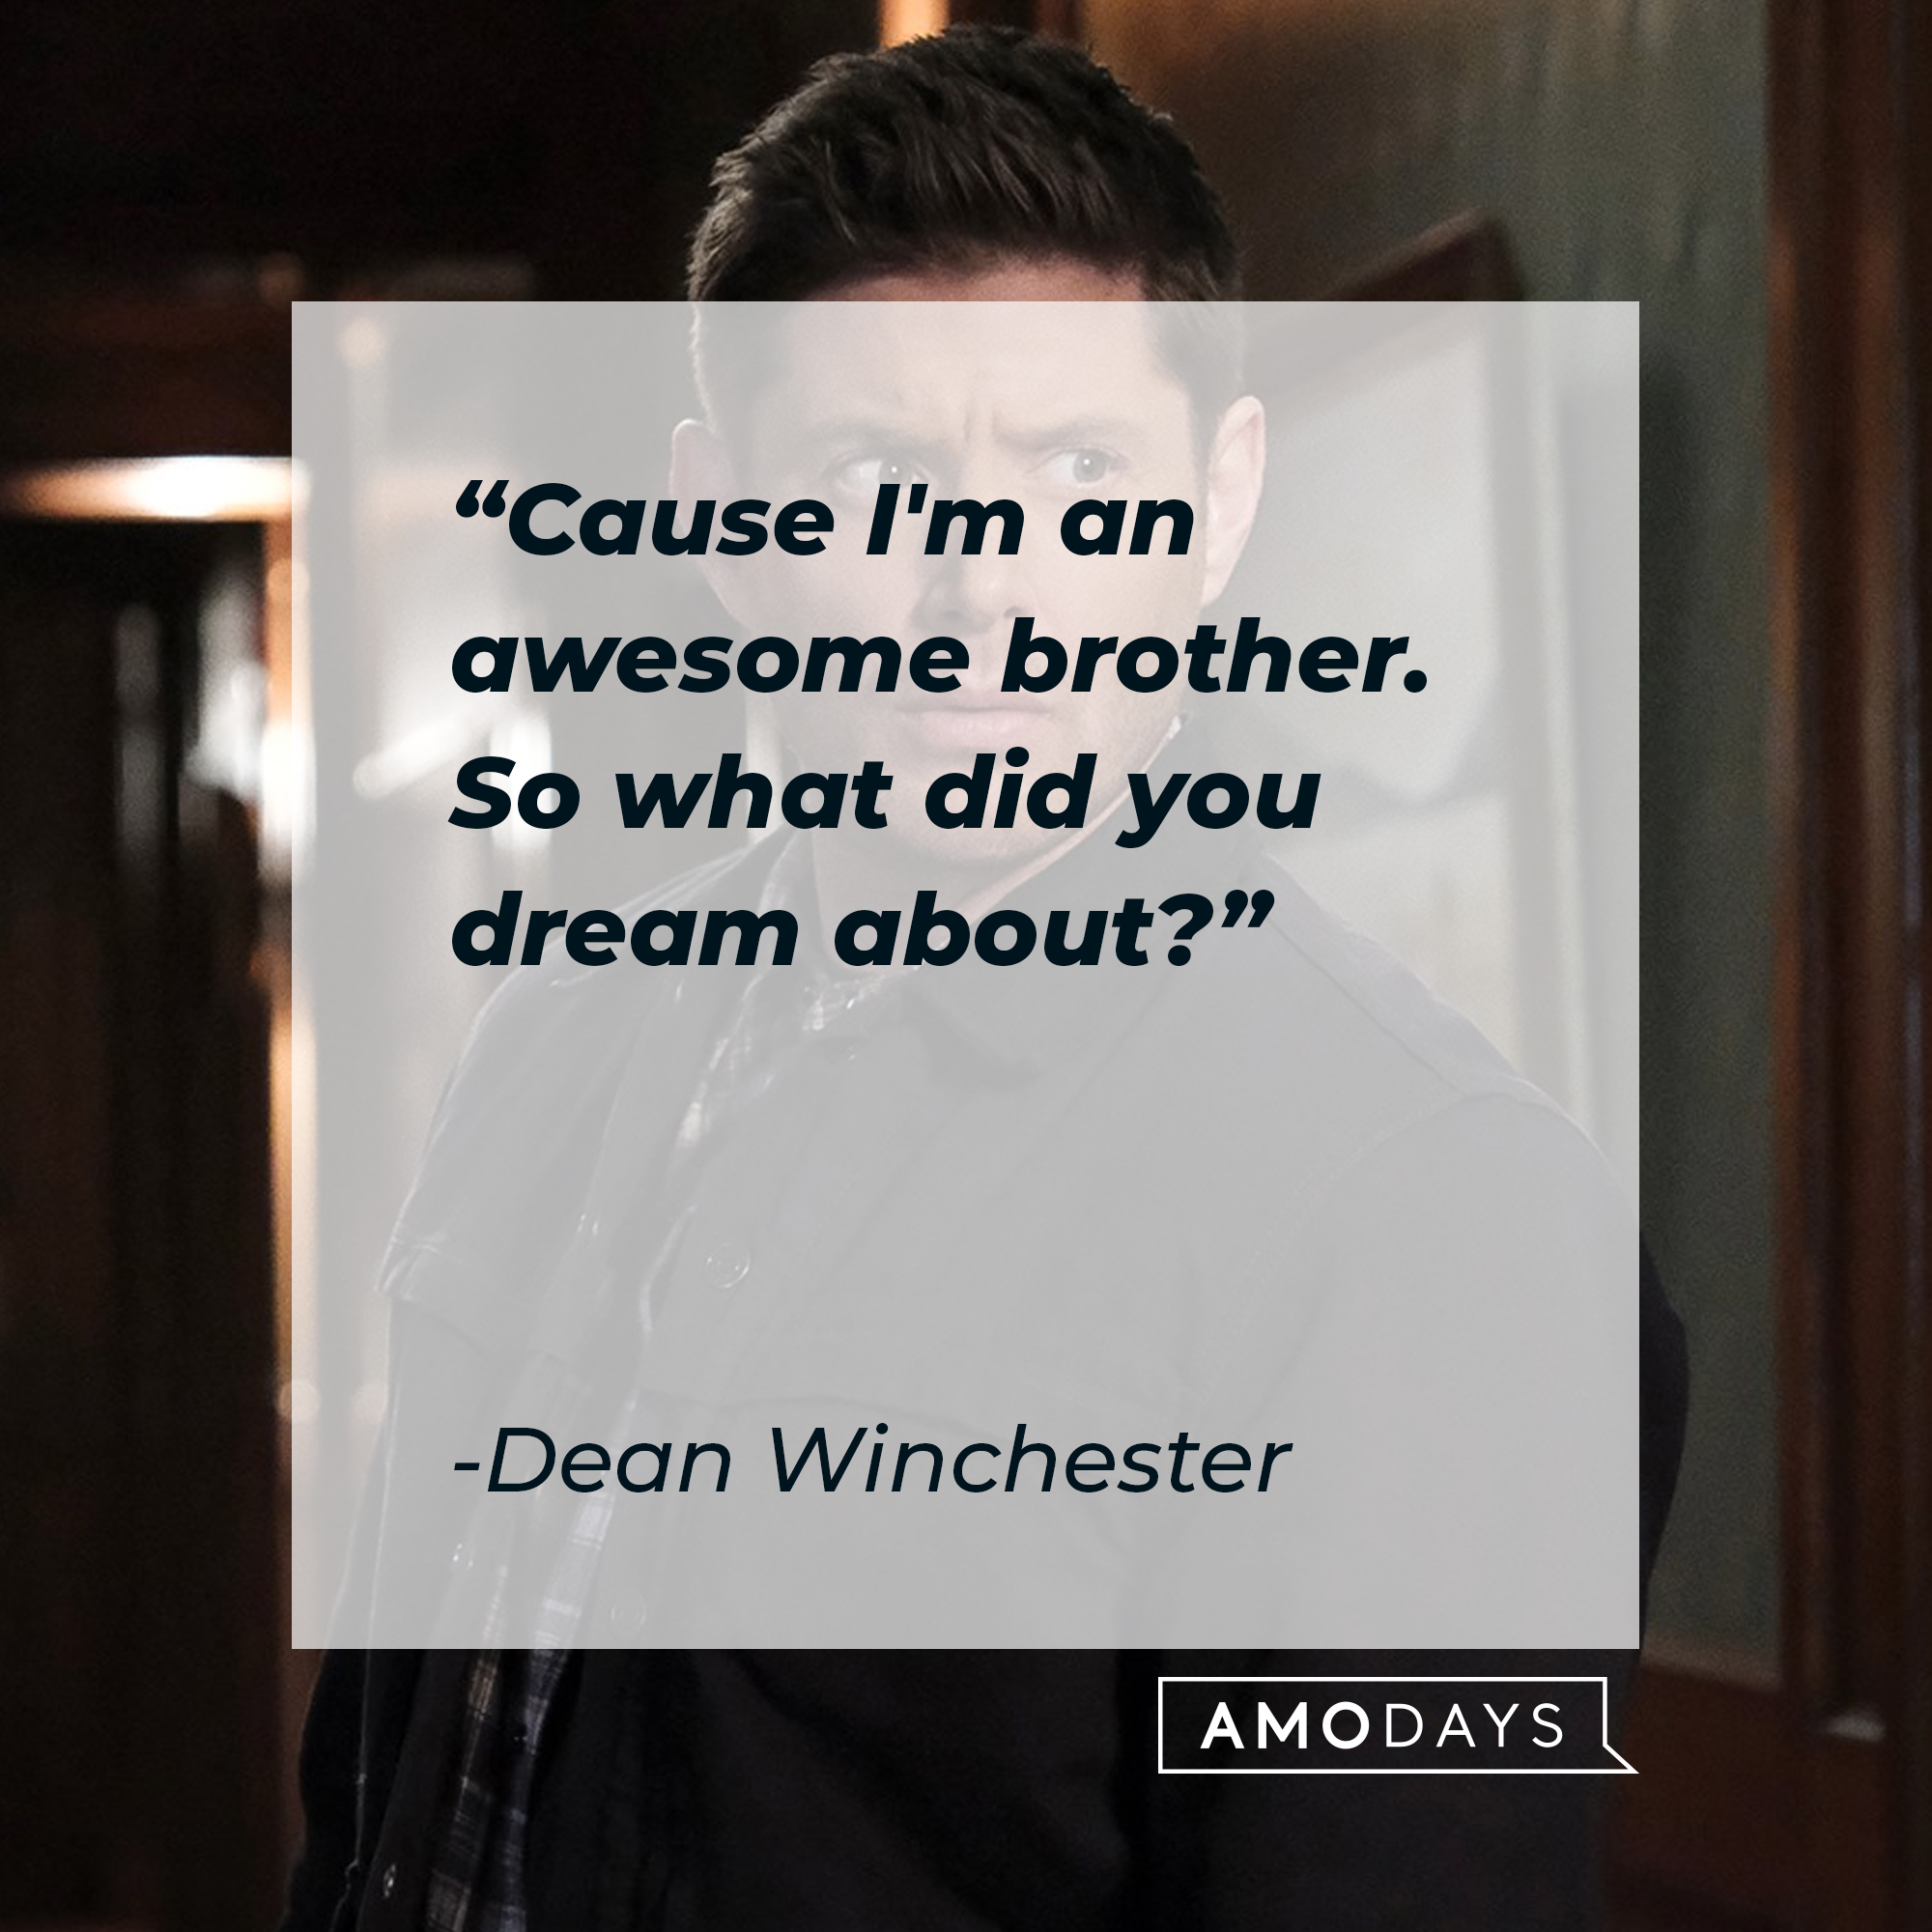 Dean Winchester's quote: "Cause I'm an awesome brother. So what did you dream about?" | Source: facebook.com/Supernatural